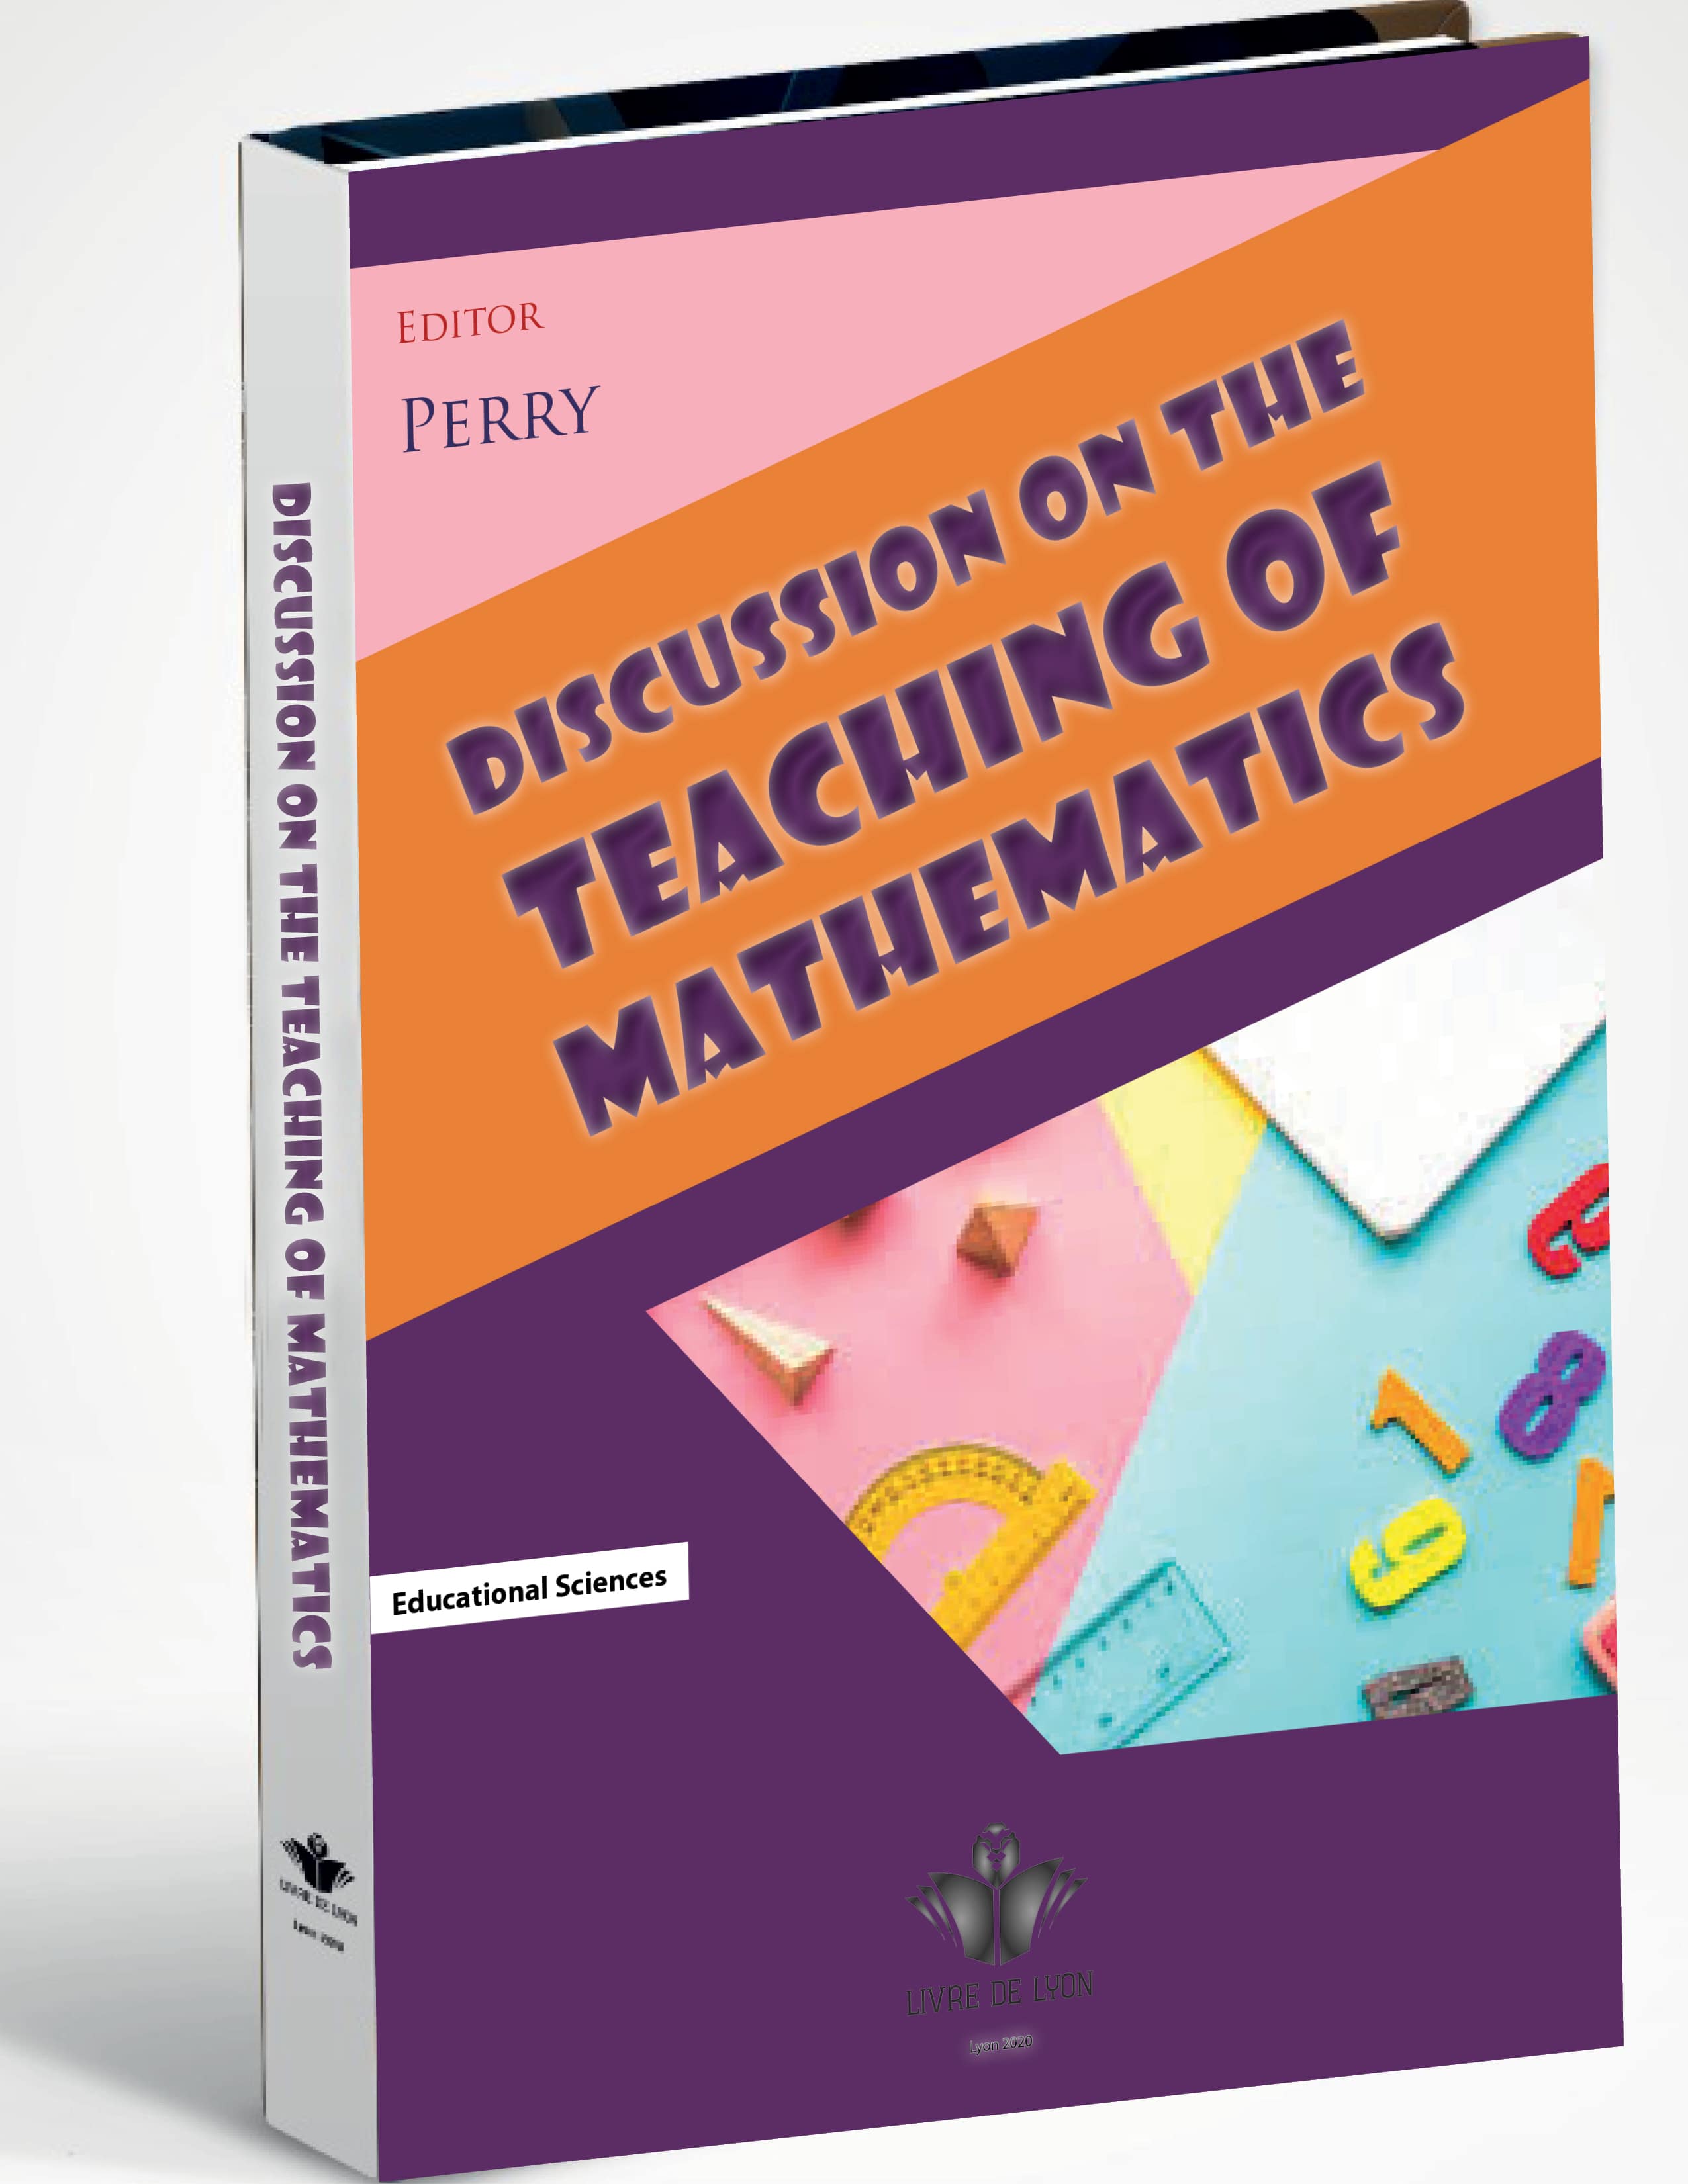 Discussion on the Teaching of Mathematics